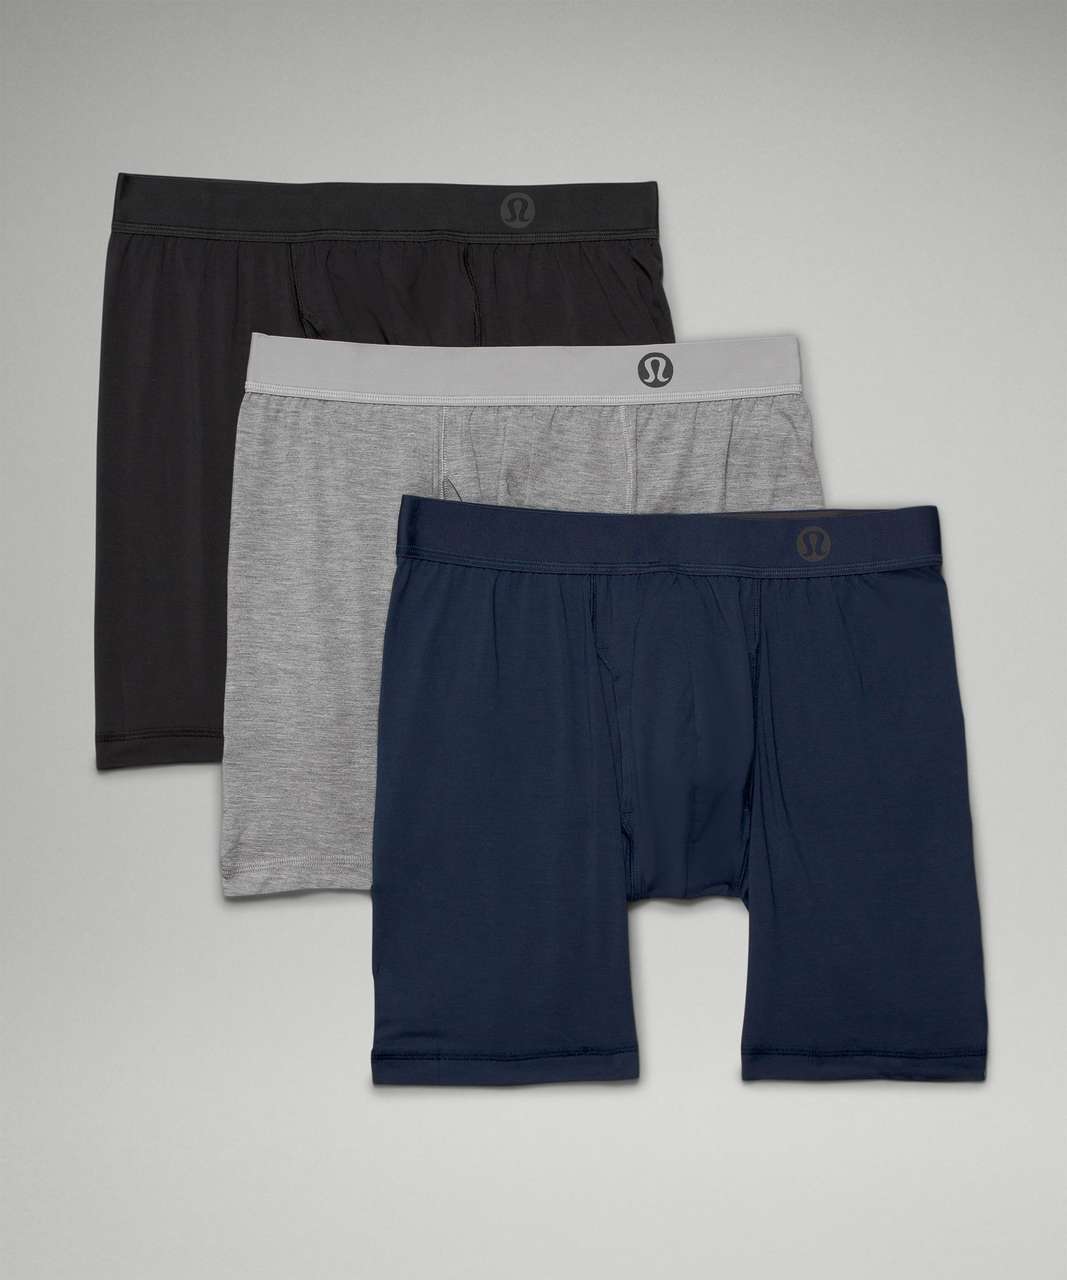 Lululemon Always In Motion Long Boxer with Fly 7" 3 Pack - Black / Heathered Core Medium Grey / True Navy